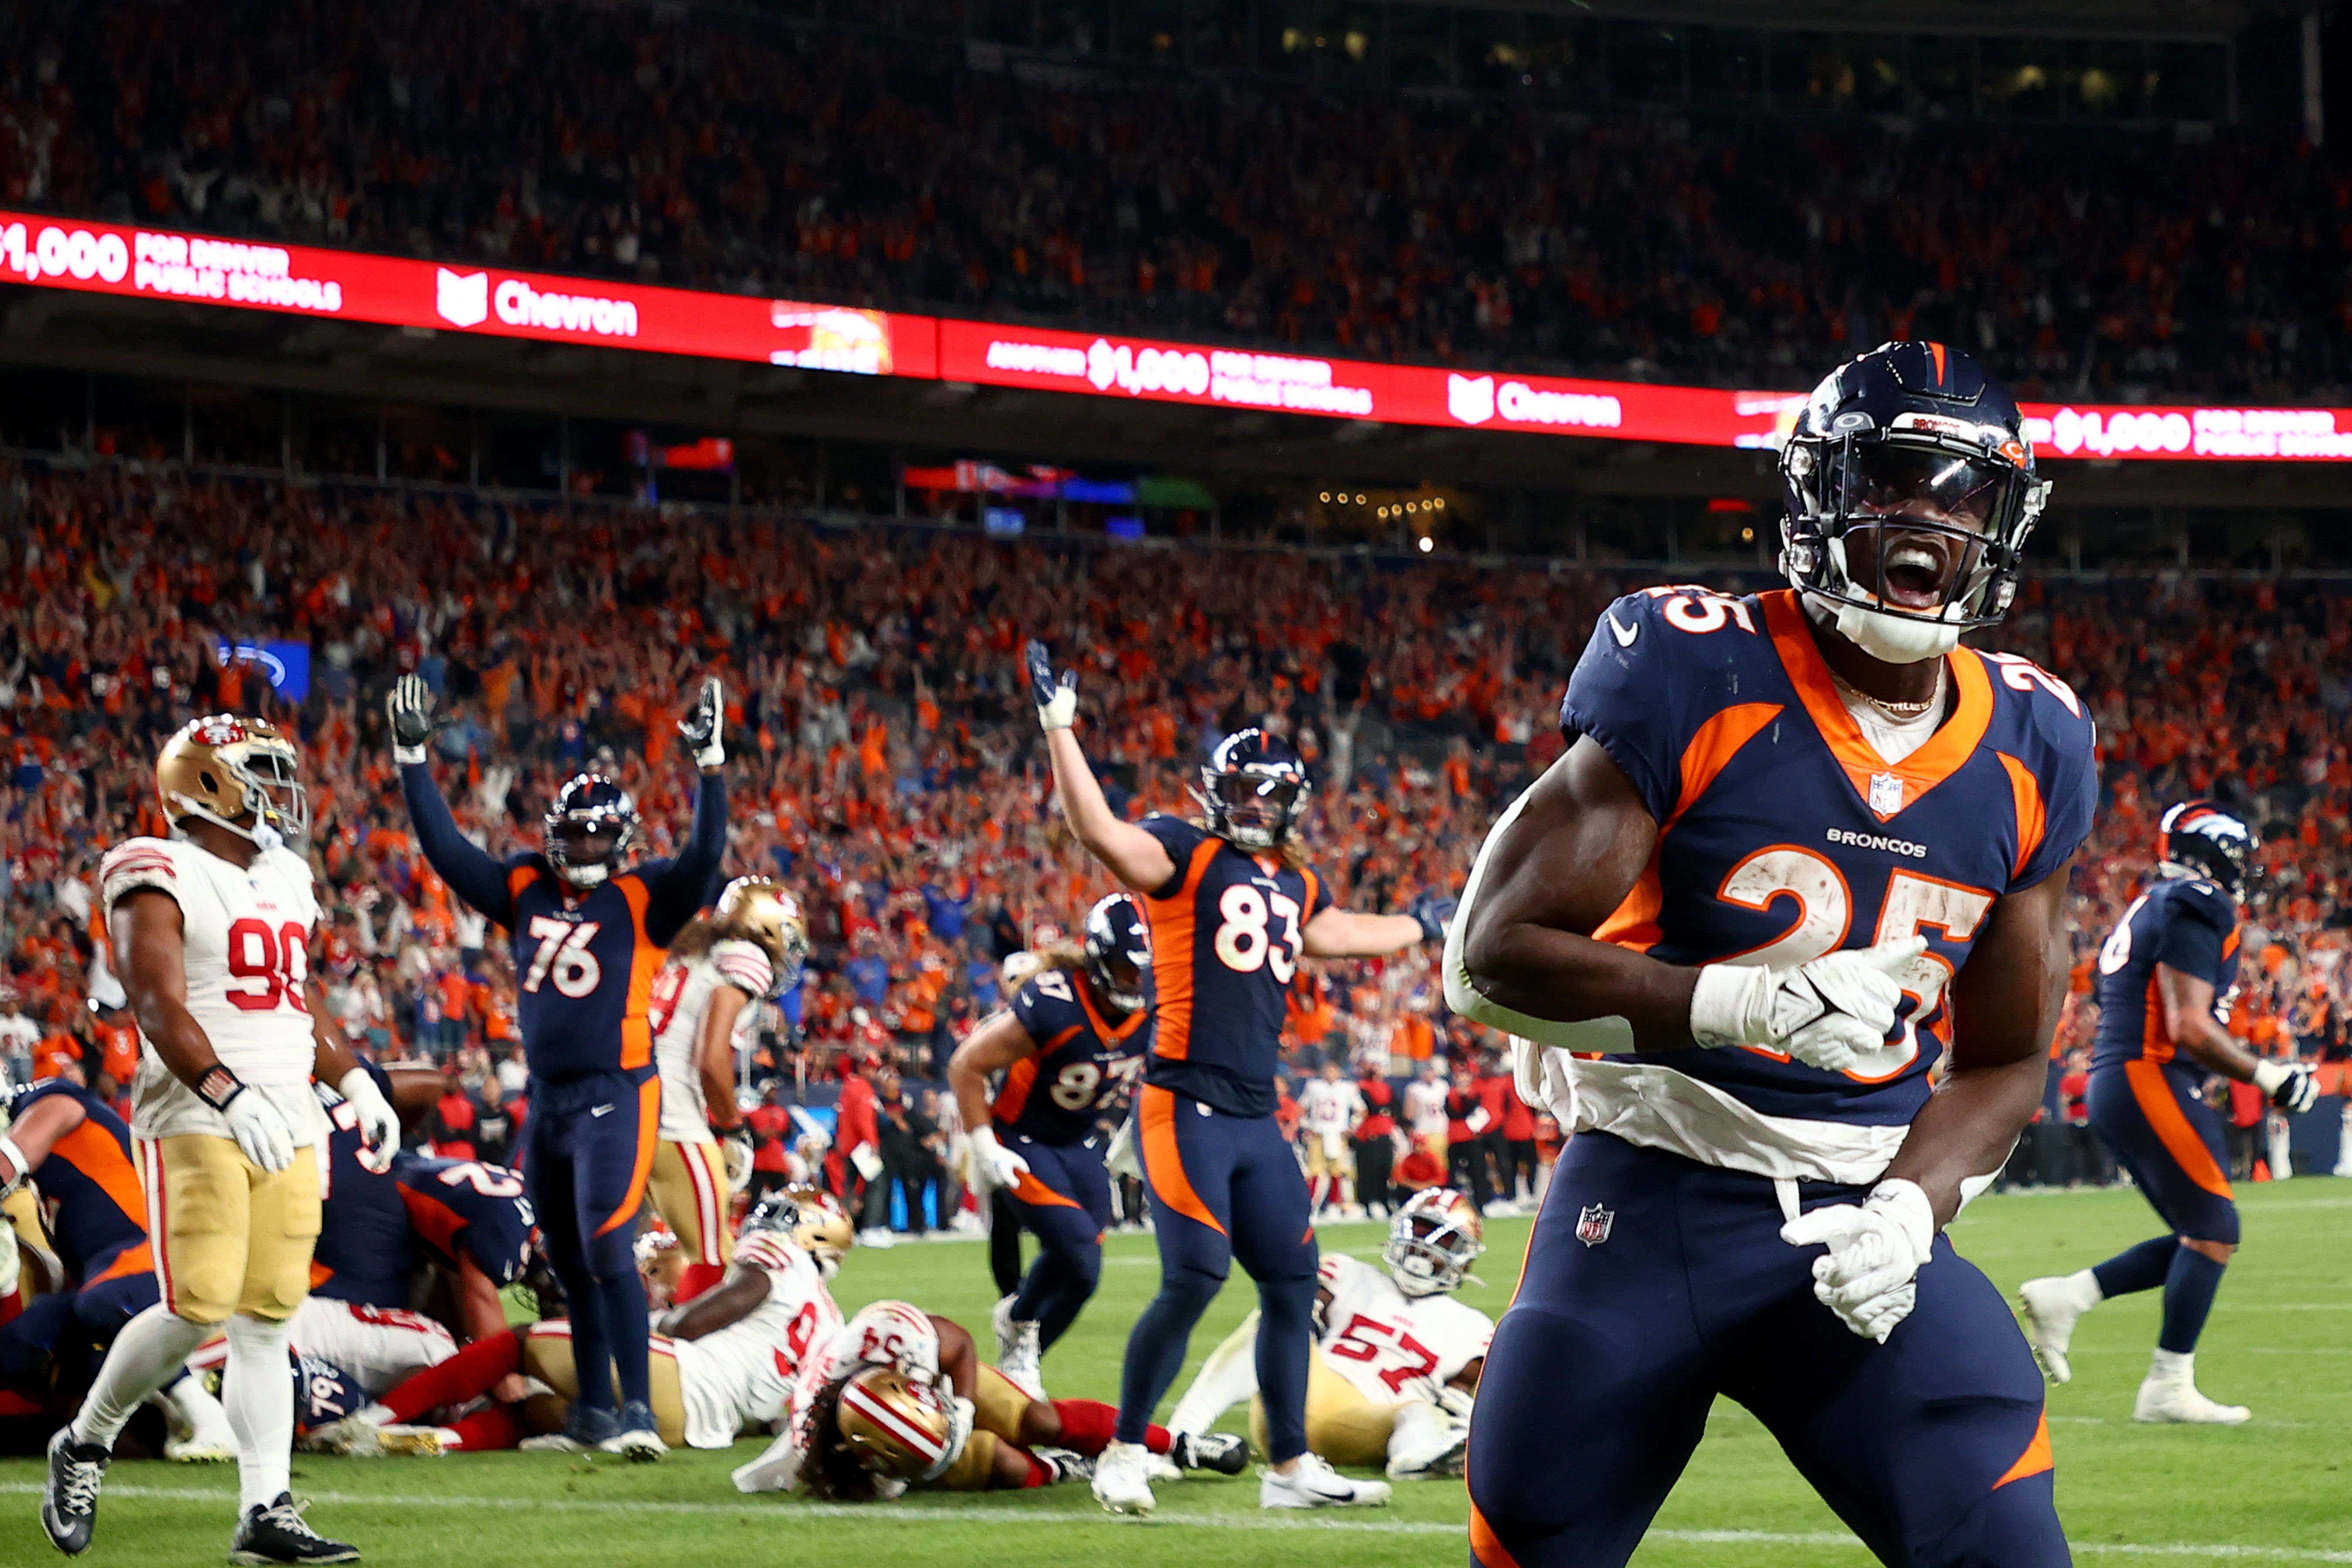 Melvin Gordon III #25 of the Denver Broncos celebrates a touchdown against the San Francisco 49ers at Empower Field At Mile High on September 25, 2022 in Denver, Colorado.